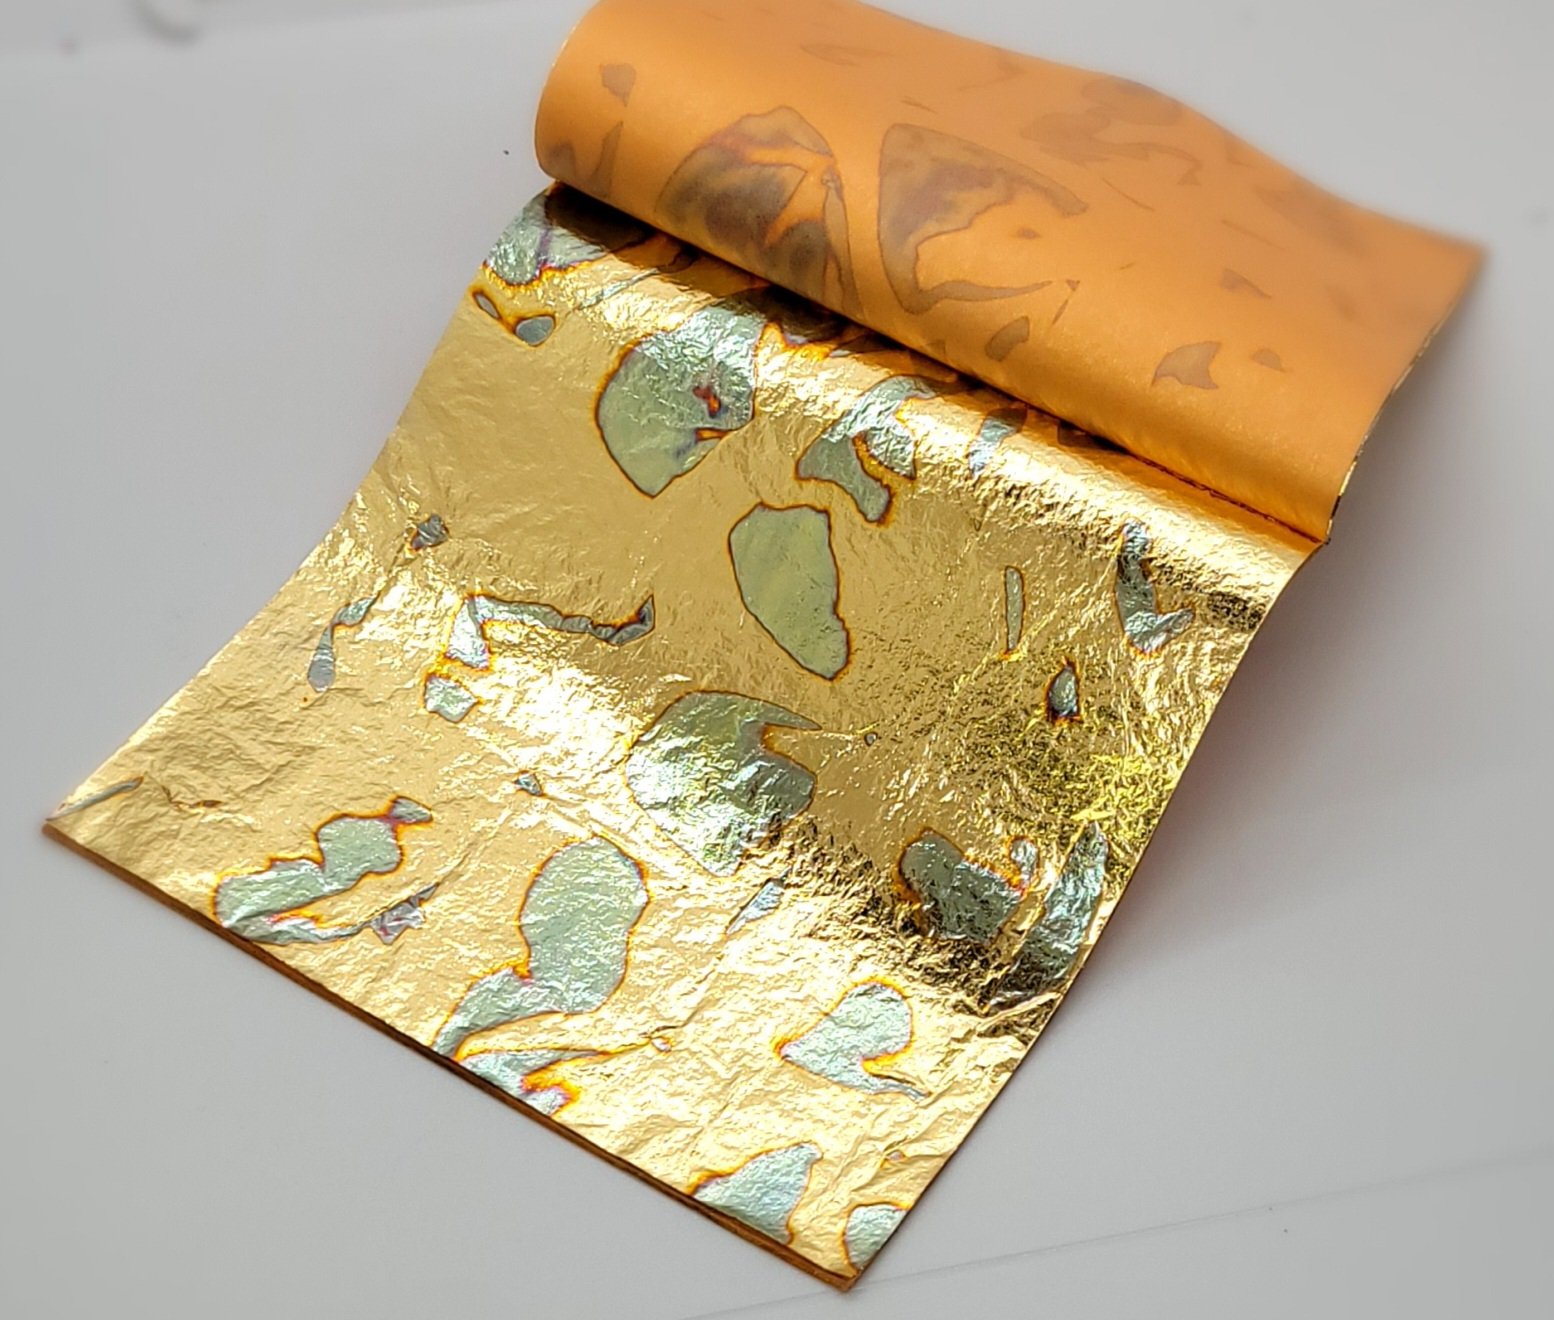 Sealing Accessories - Imitation Gold Leaf Sheets (20 Colors)